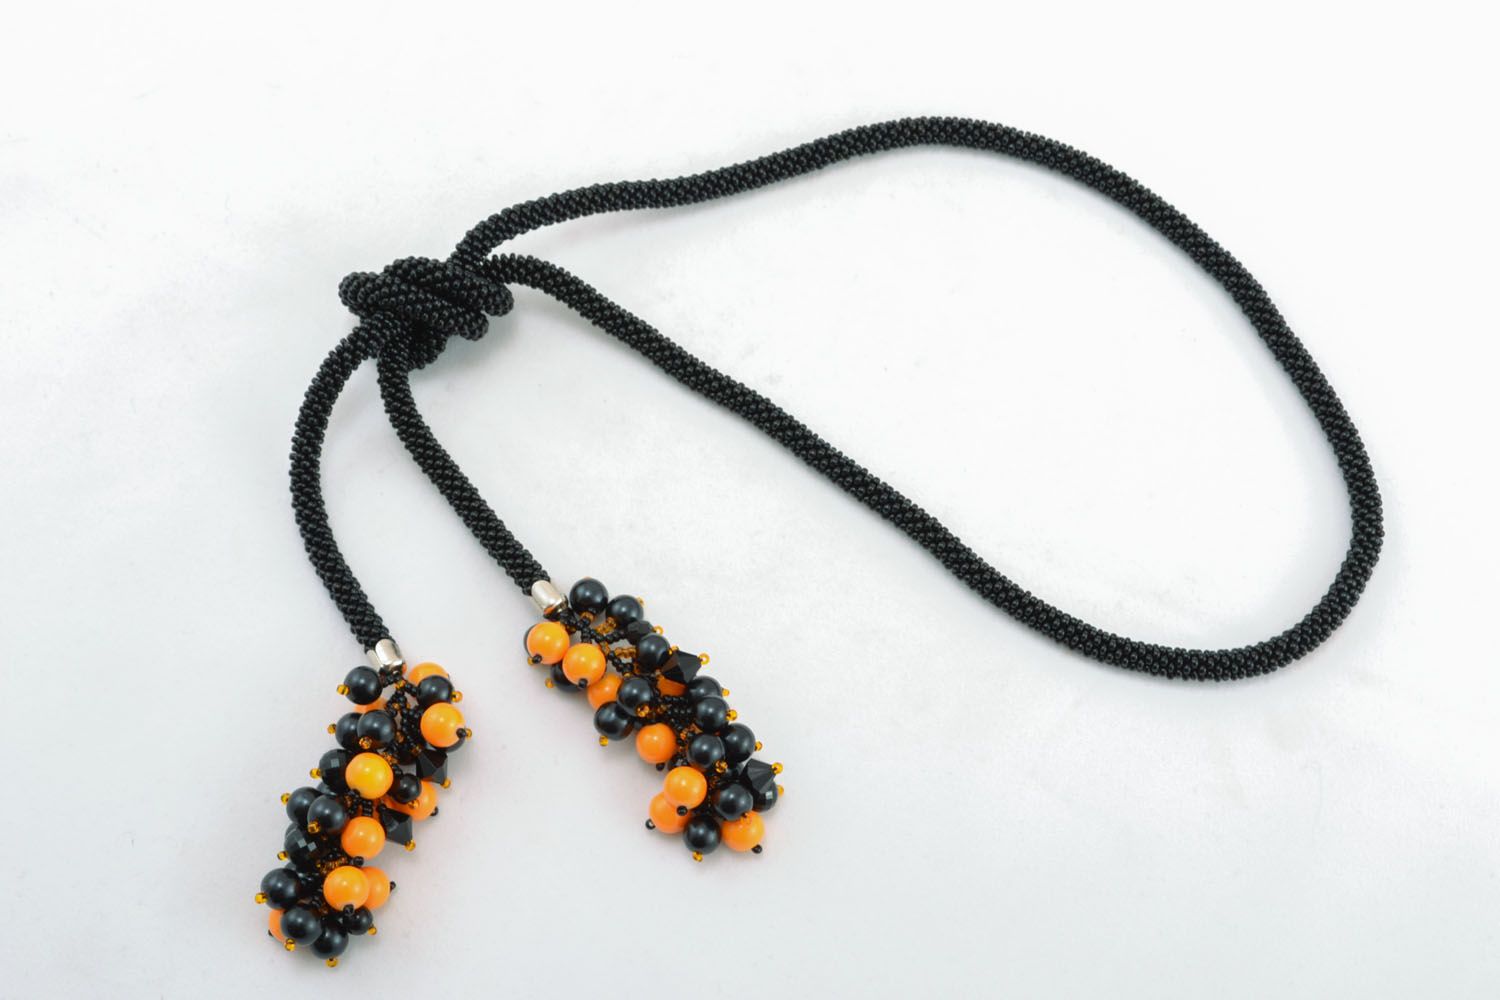 Necklace made of Czech beads photo 1